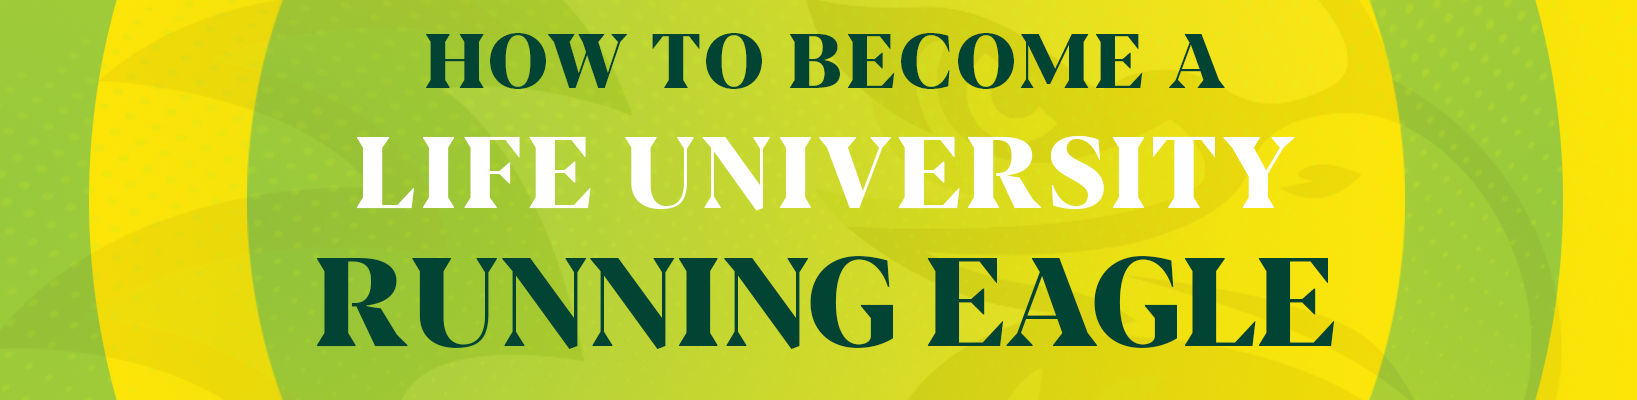 How to Become a Life University Running Eagle